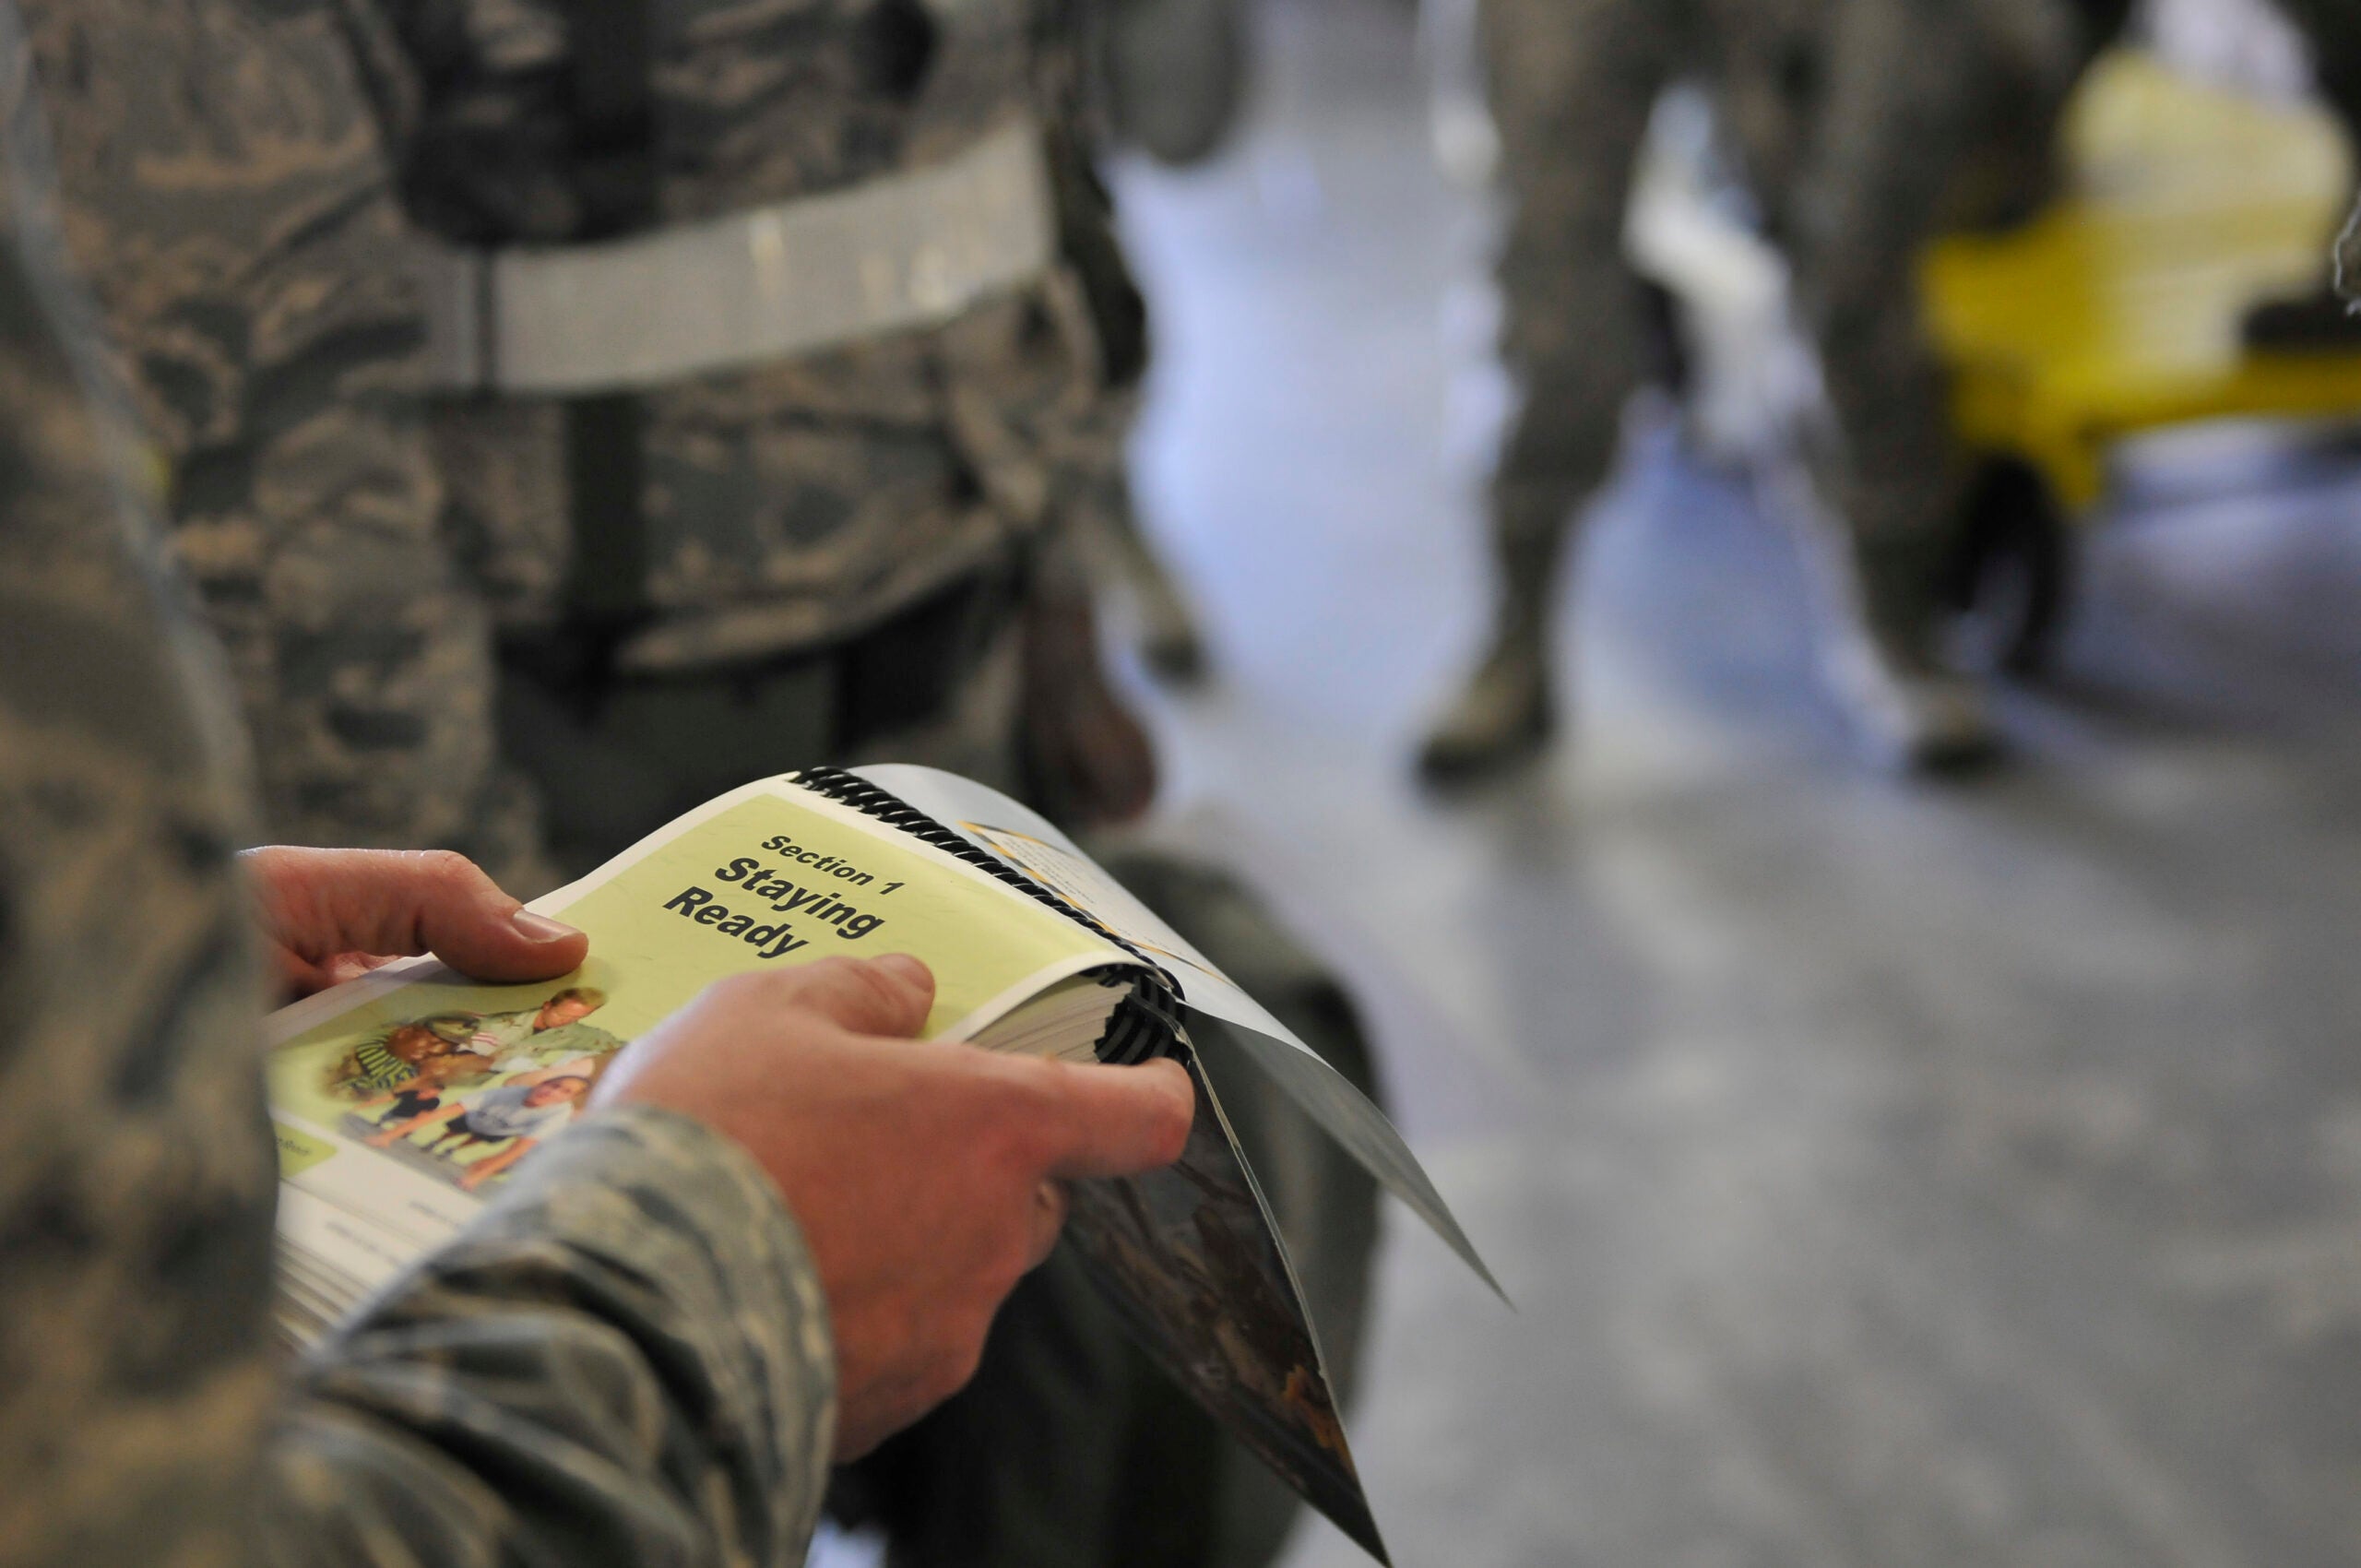 Airman reviews the Airman's Manual for Self Aid Buddy Care (SABC) during the Eagle Claw 2016 exercise at the 125th Fighter Wing in Jacksonville, Florida, March 7, 2016. The exercise tested the Airmen's ability to accomplish mission objectives through contested and degraded conditions.